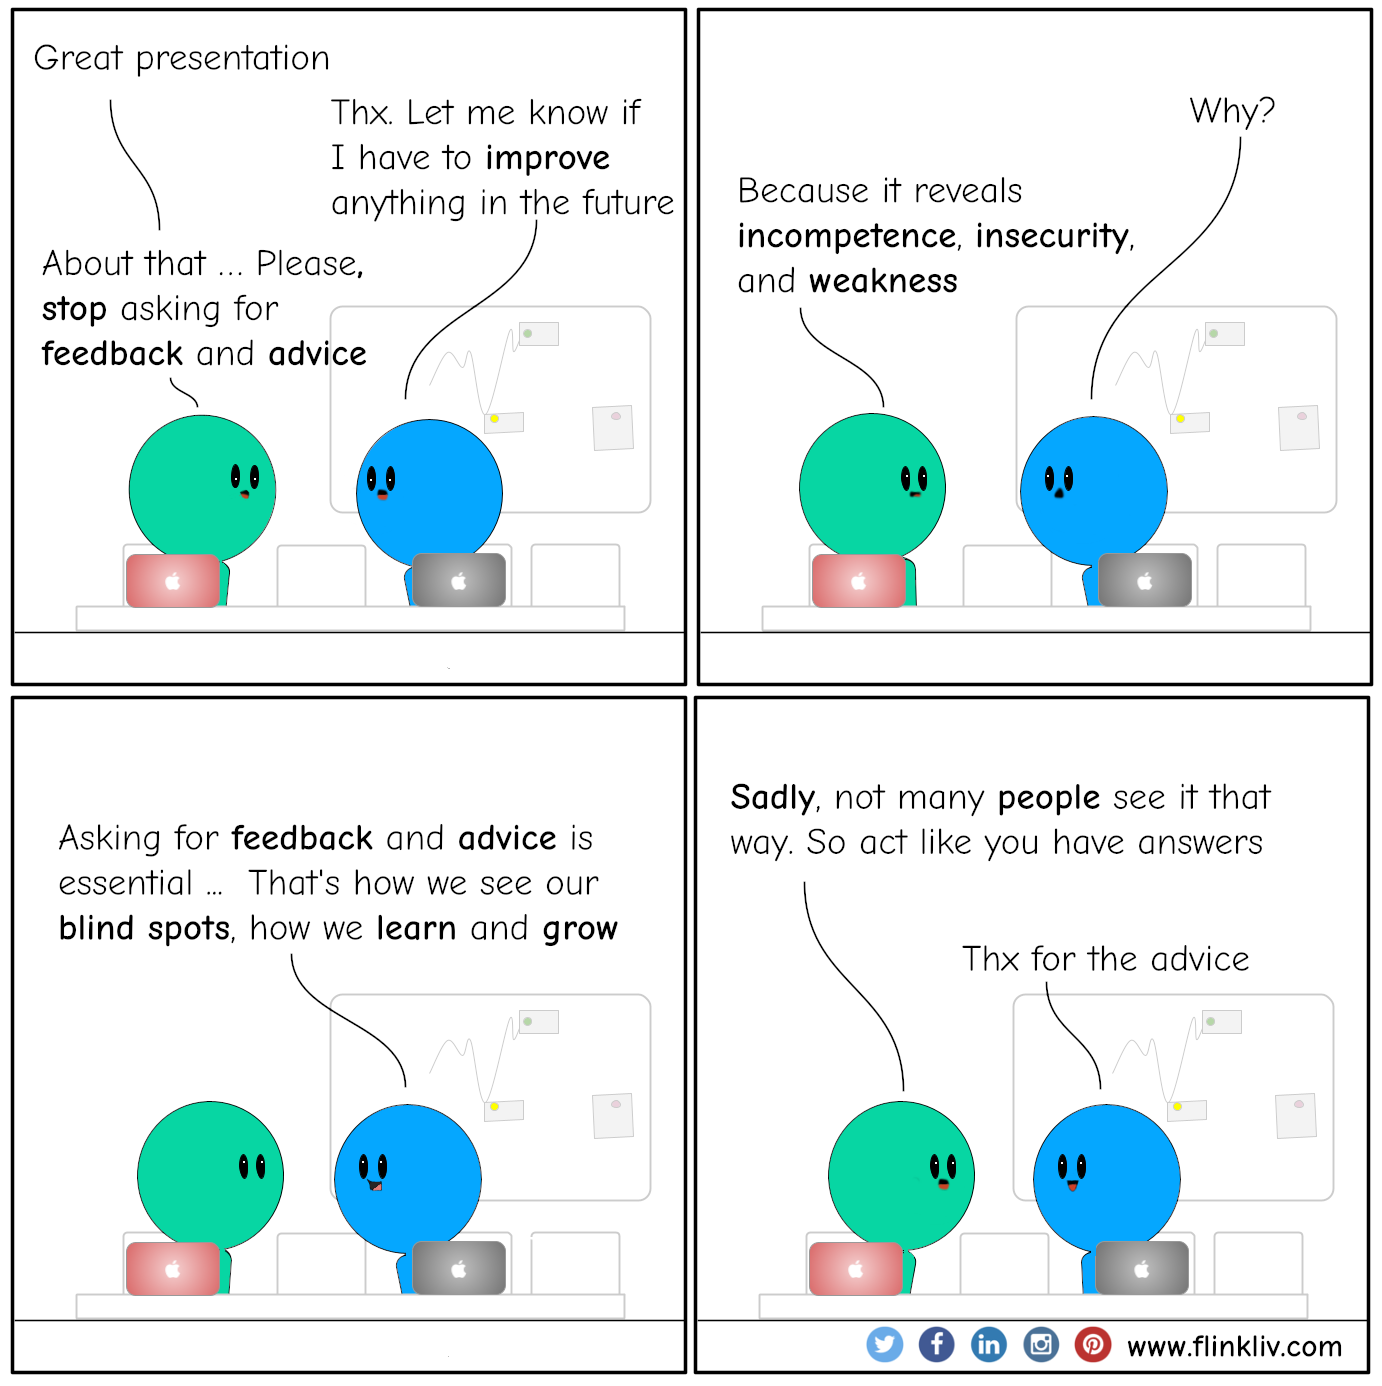 Conversation between A and B about feedback and advice. A:Great presentation. B:Let me know if I have to improve anything in the future. A:About that. Please, stop asking for feedback and advice. B:Why? A:Because it reveals incompetence, insecurity, and weakness. B:Asking for feedback and advice is essential; that's how we see our blind spots, how we learn and grow. A:Sadly, not many people see it that way. So act like you have answers. B: Thx for the advice. By flinkliv.com